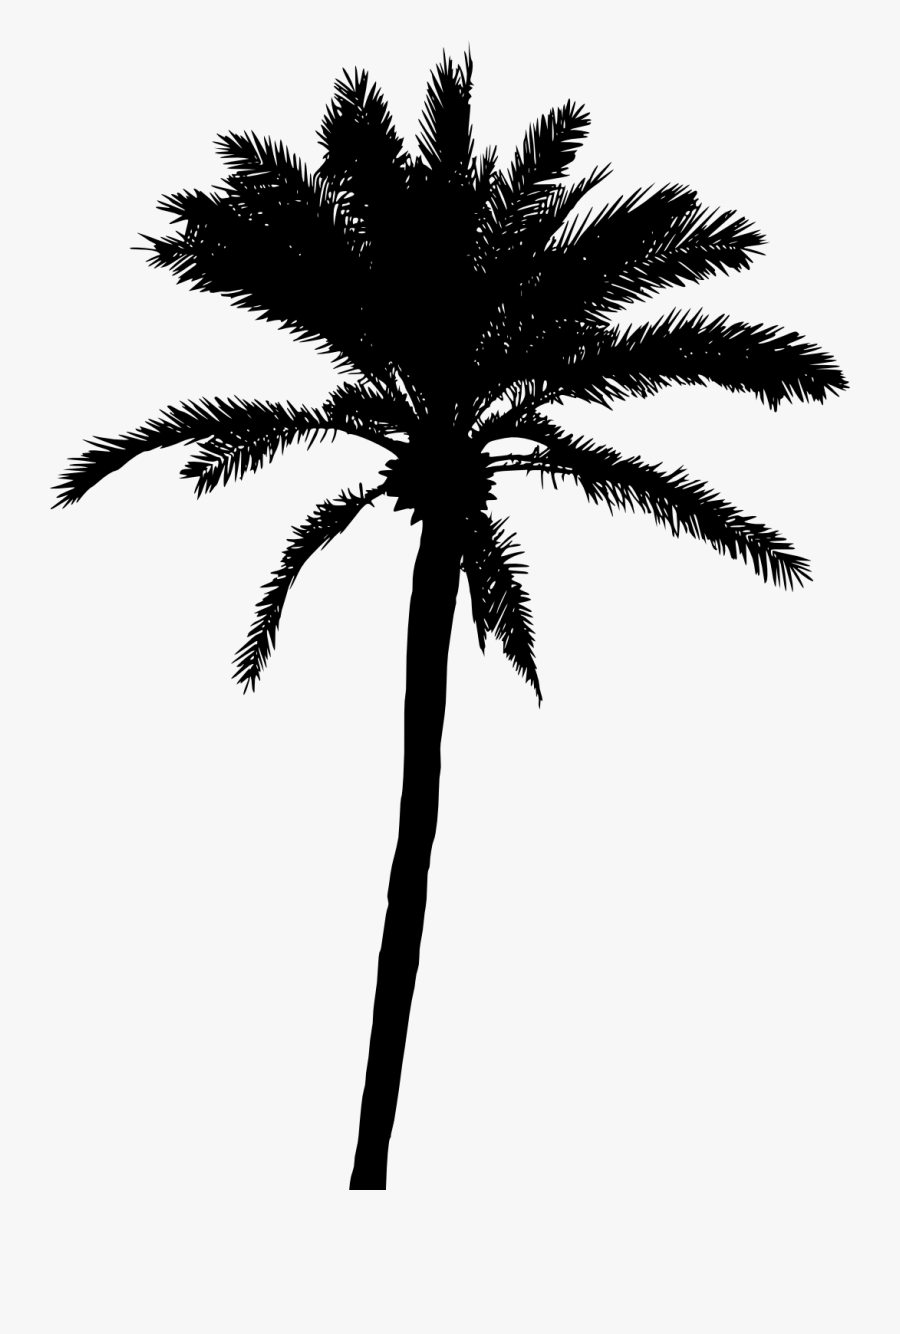 20 Palm Tree Silhouette Vol - Palm Tree Vector Png, Transparent Clipart